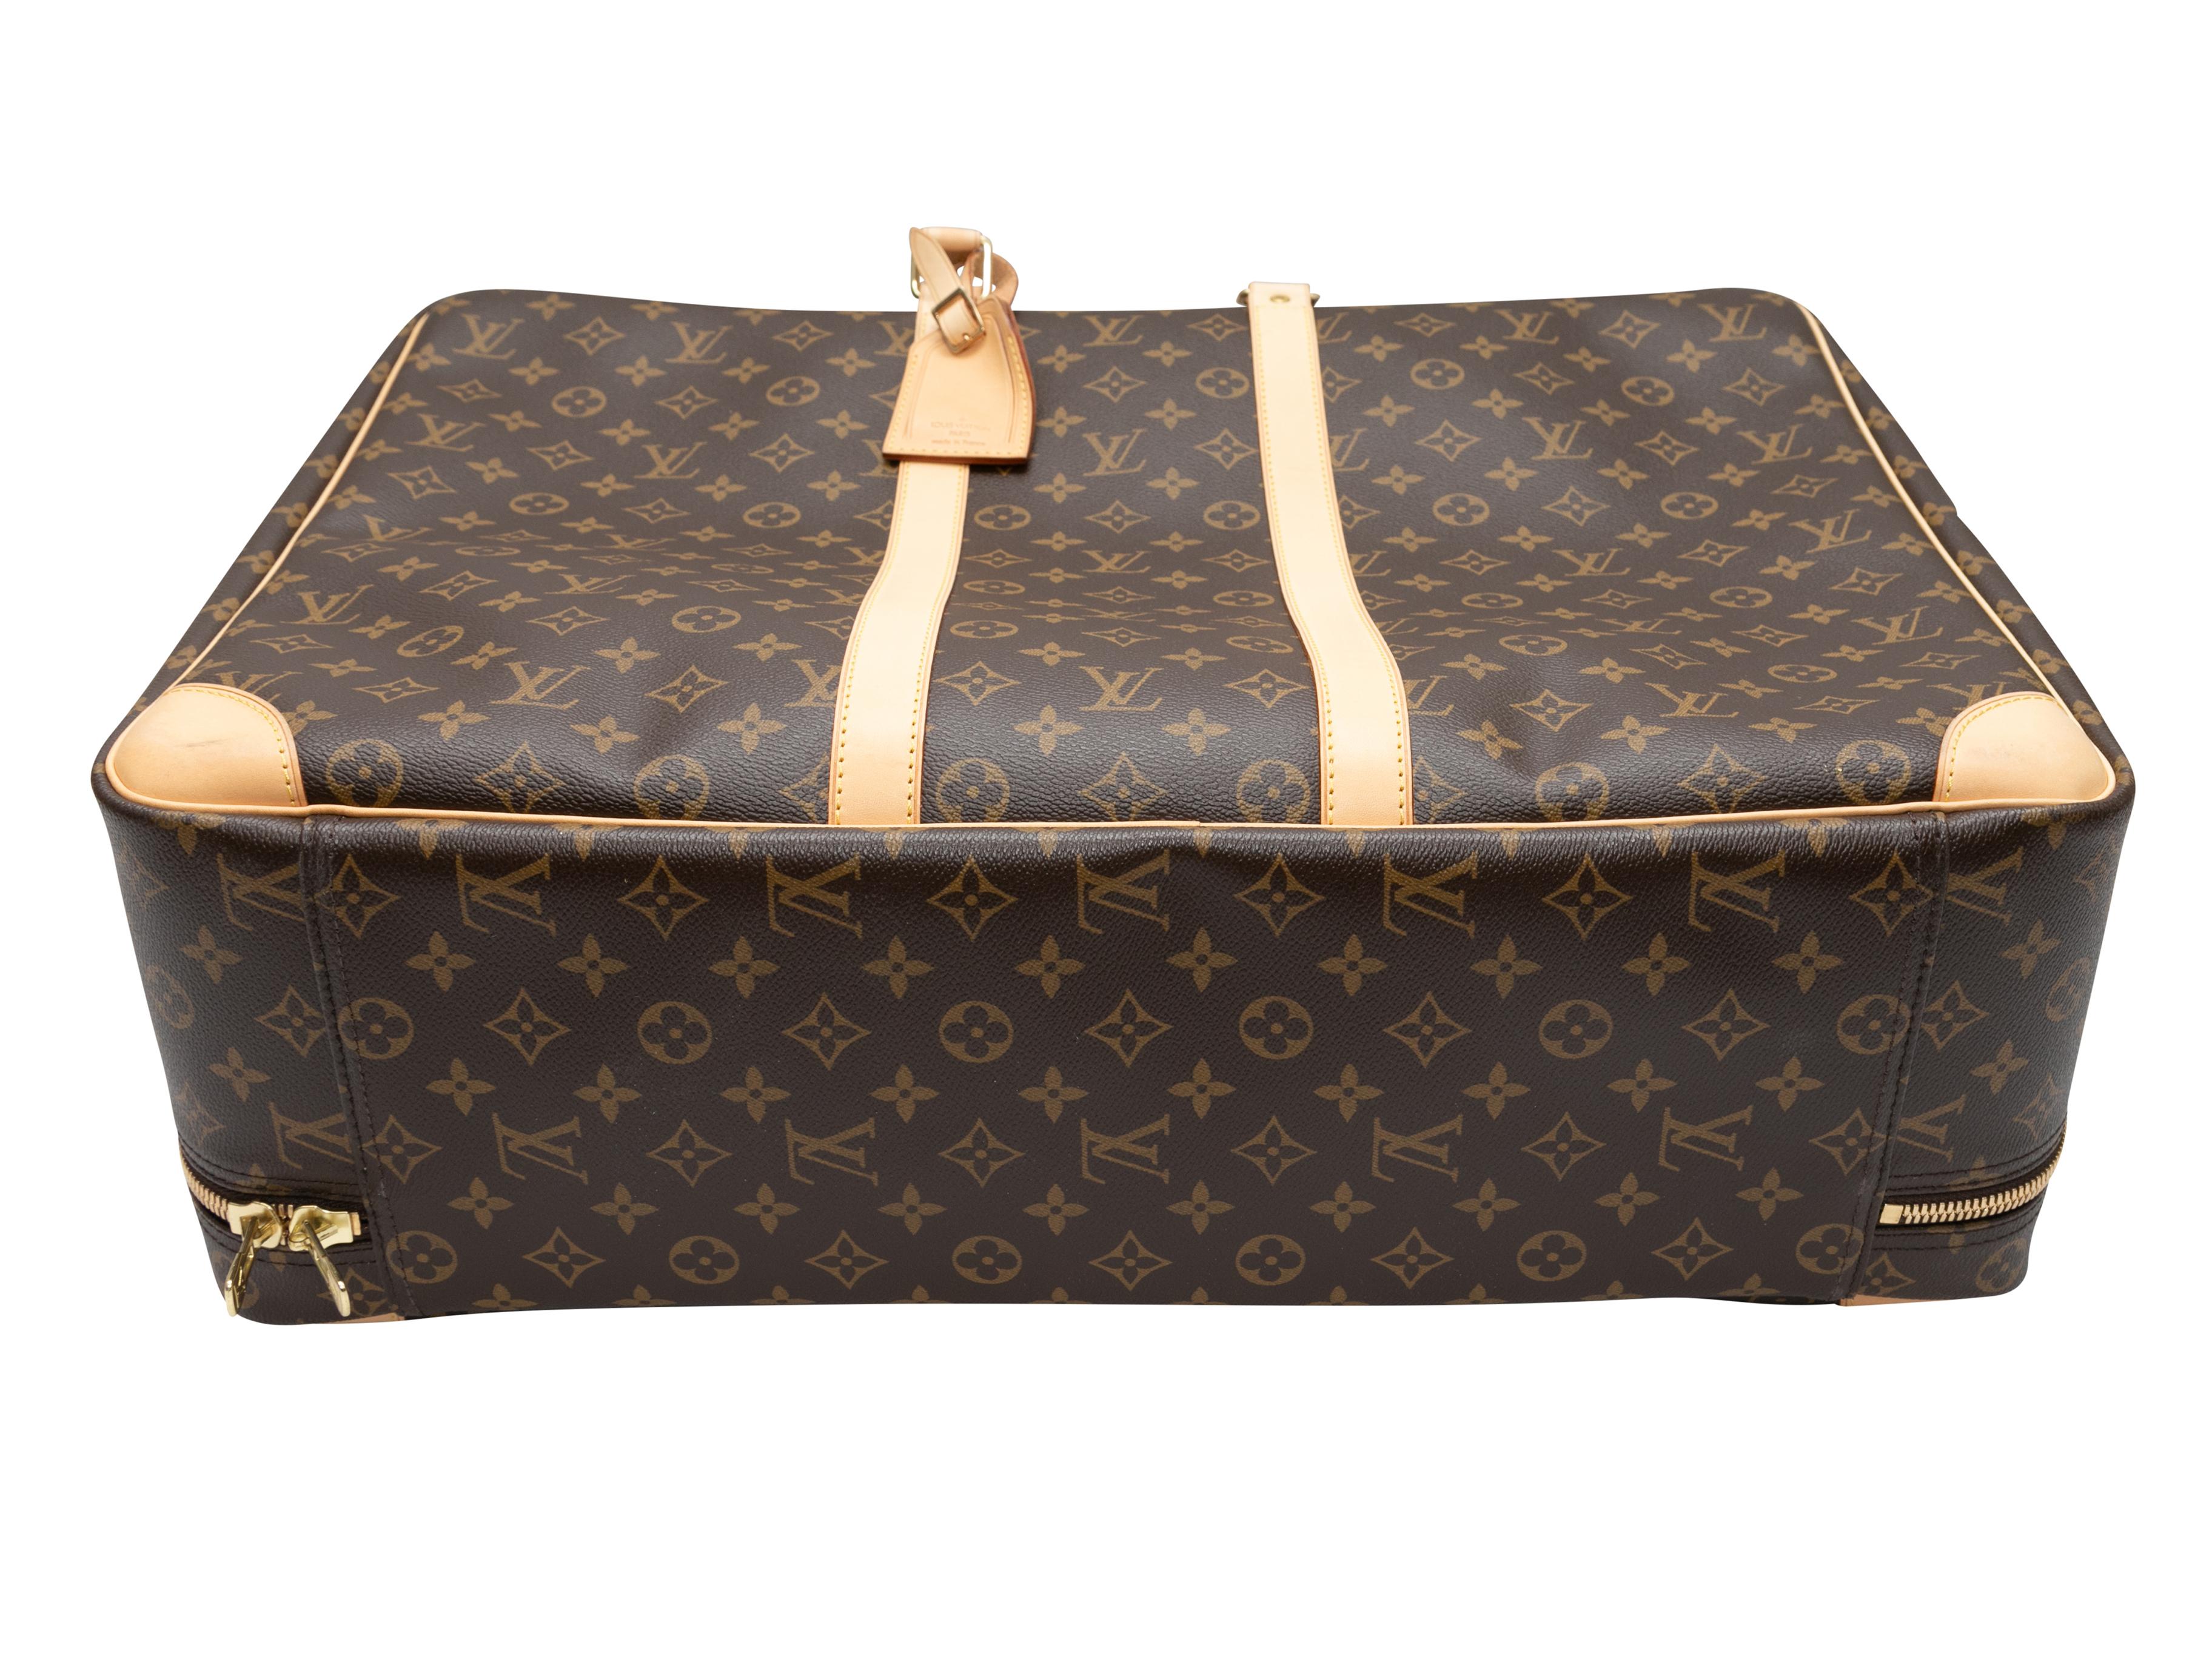 Brown Louis Vuitton Monogram Large Soft Trunk. This trunk features a coated canvas body, leather trim, gold-tone hardware, dual rolled top handles, and a top zip closure. 21.25